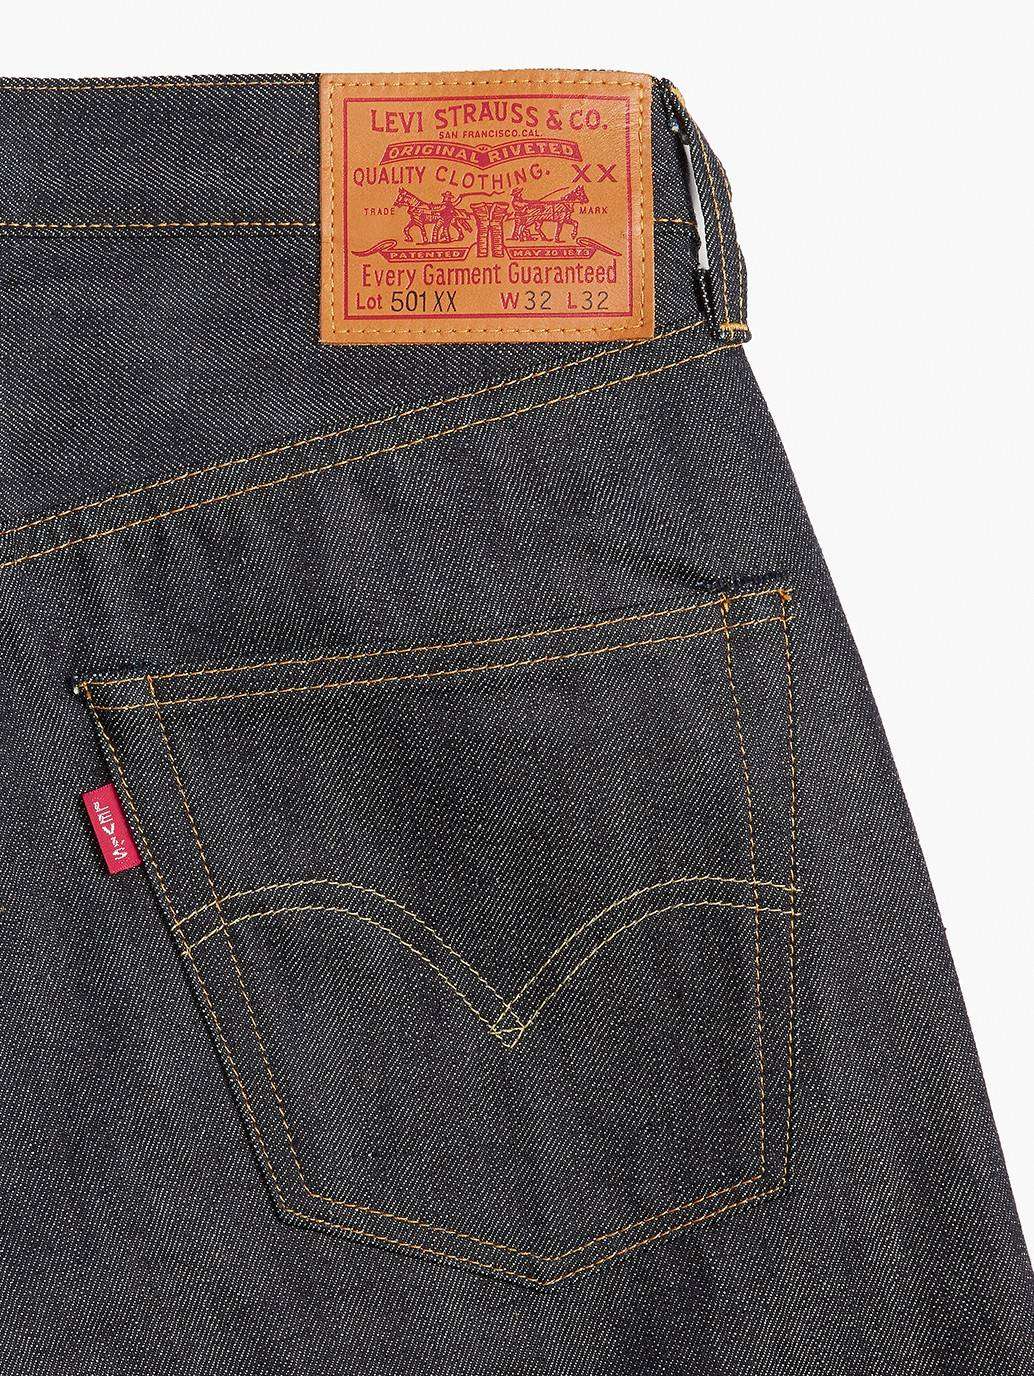 Buy 1947 501® Jeans | Levi's® Official Online Store MY